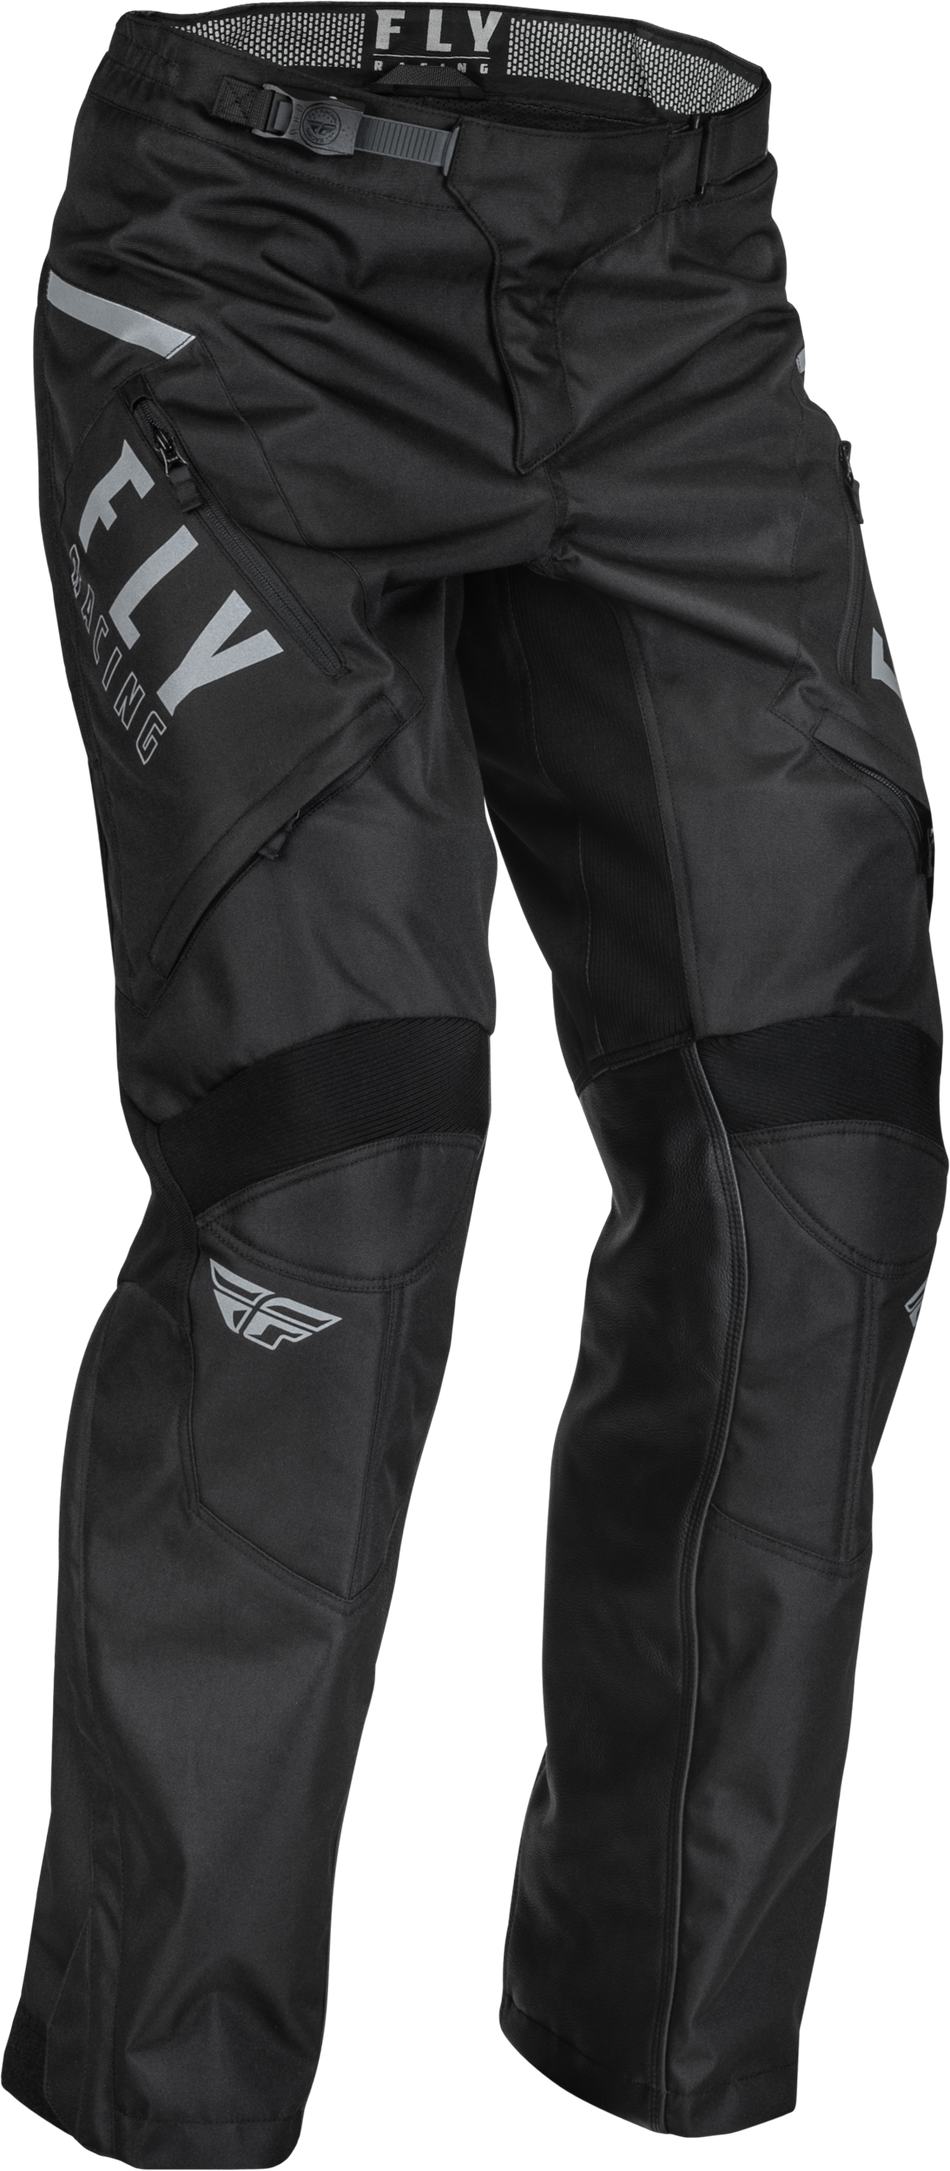 FLY RACING Patrol Over-Boot Pants Black/White Sz 46 376-64046